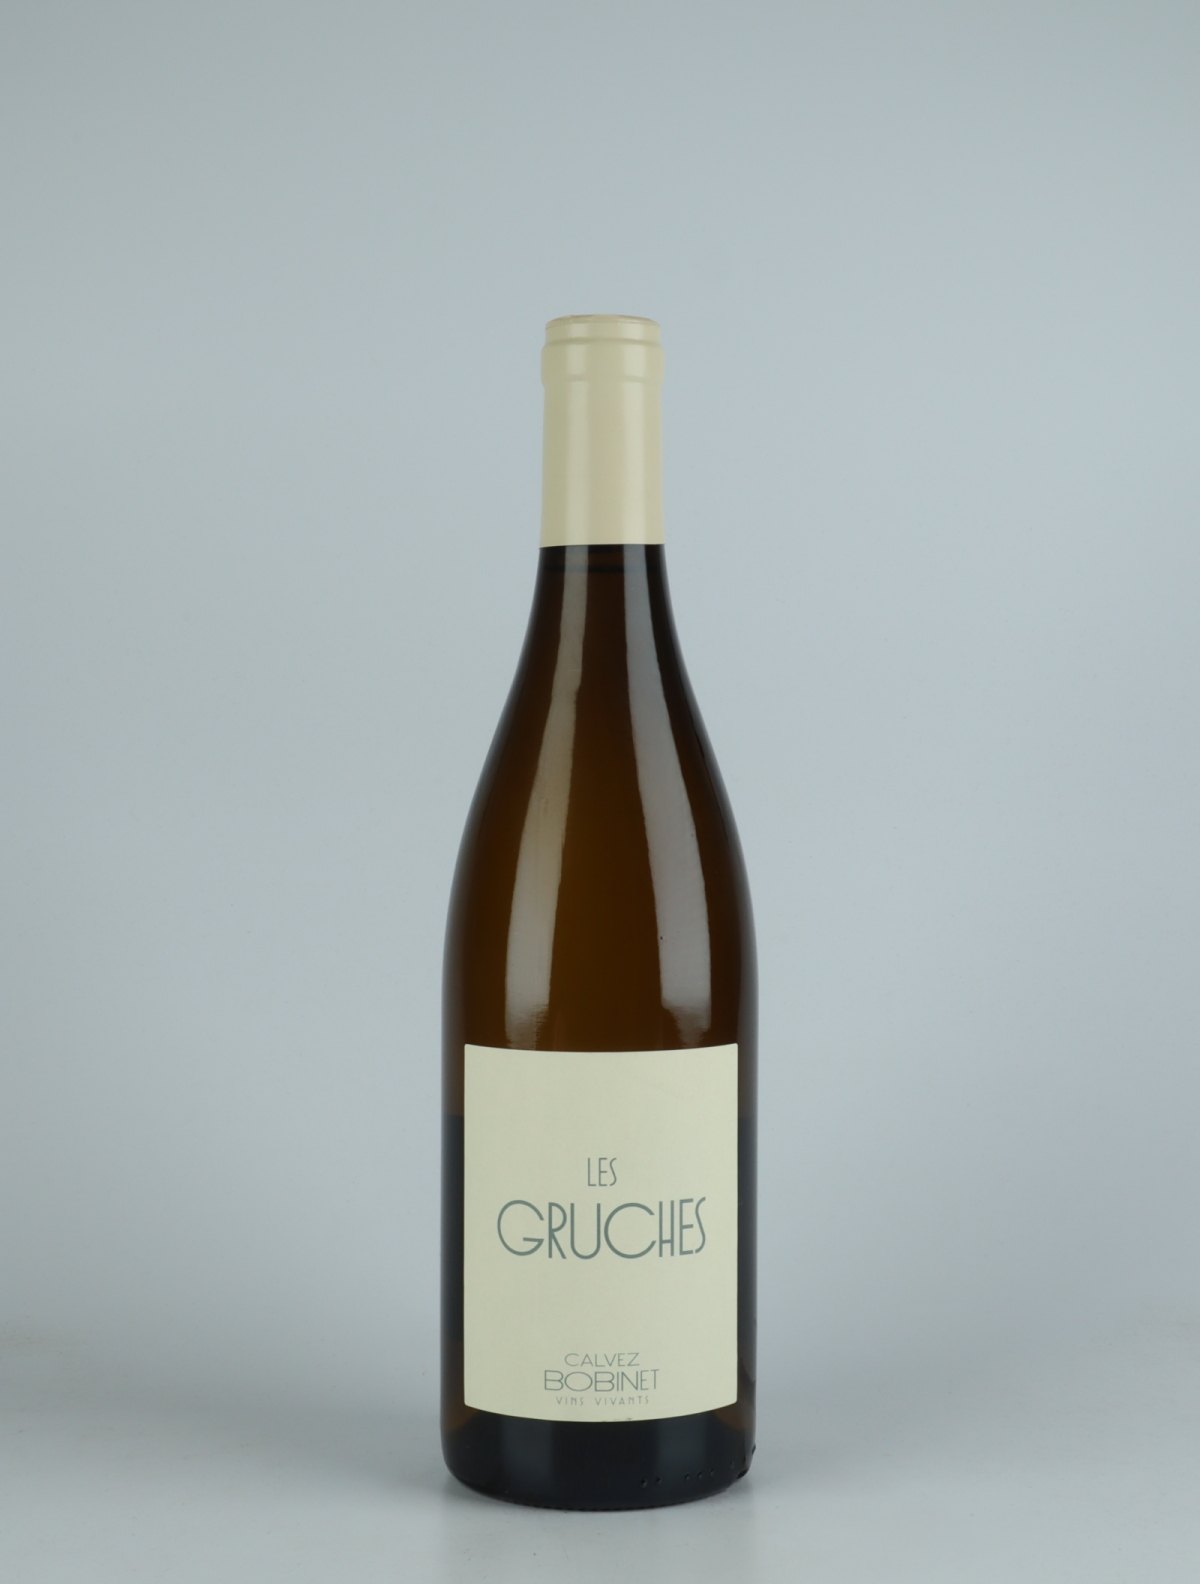 A bottle 2019 Saumur Blanc - Les Gruches White wine from Domaine Bobinet, Loire in France